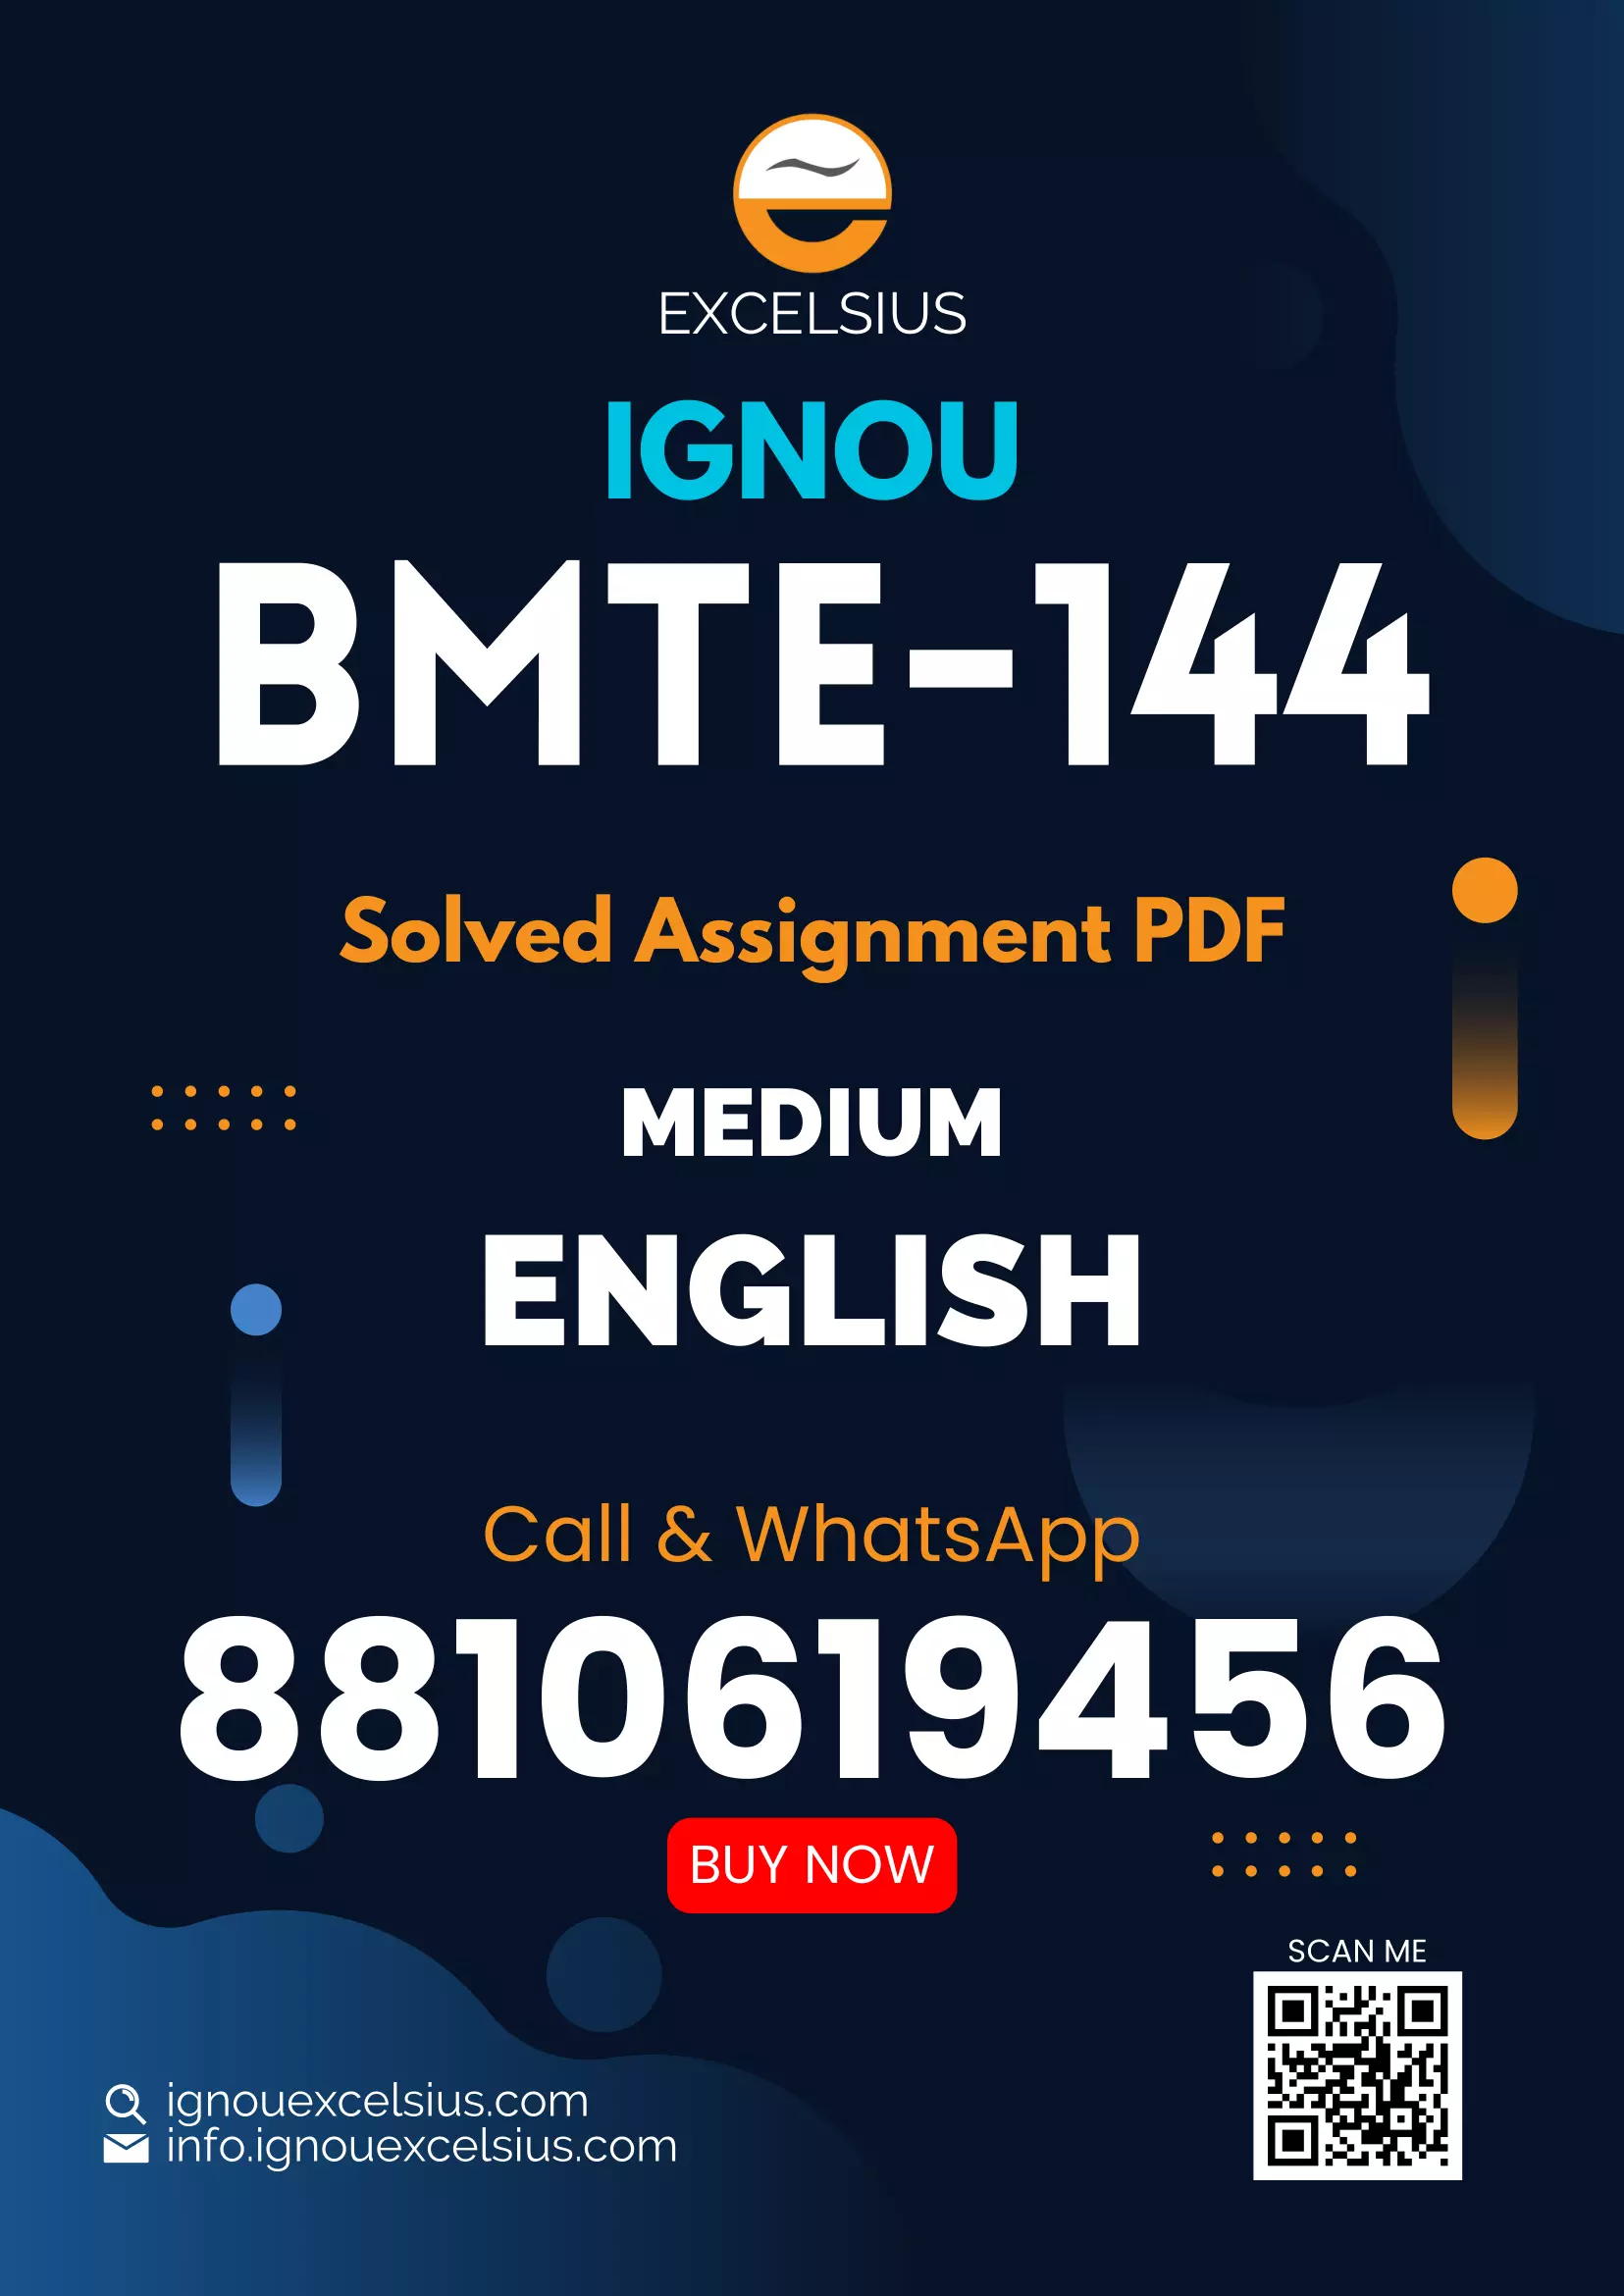 IGNOU BMTE-144 - Numerical Analysis, Latest Solved Assignment-January 2023 - December 2023